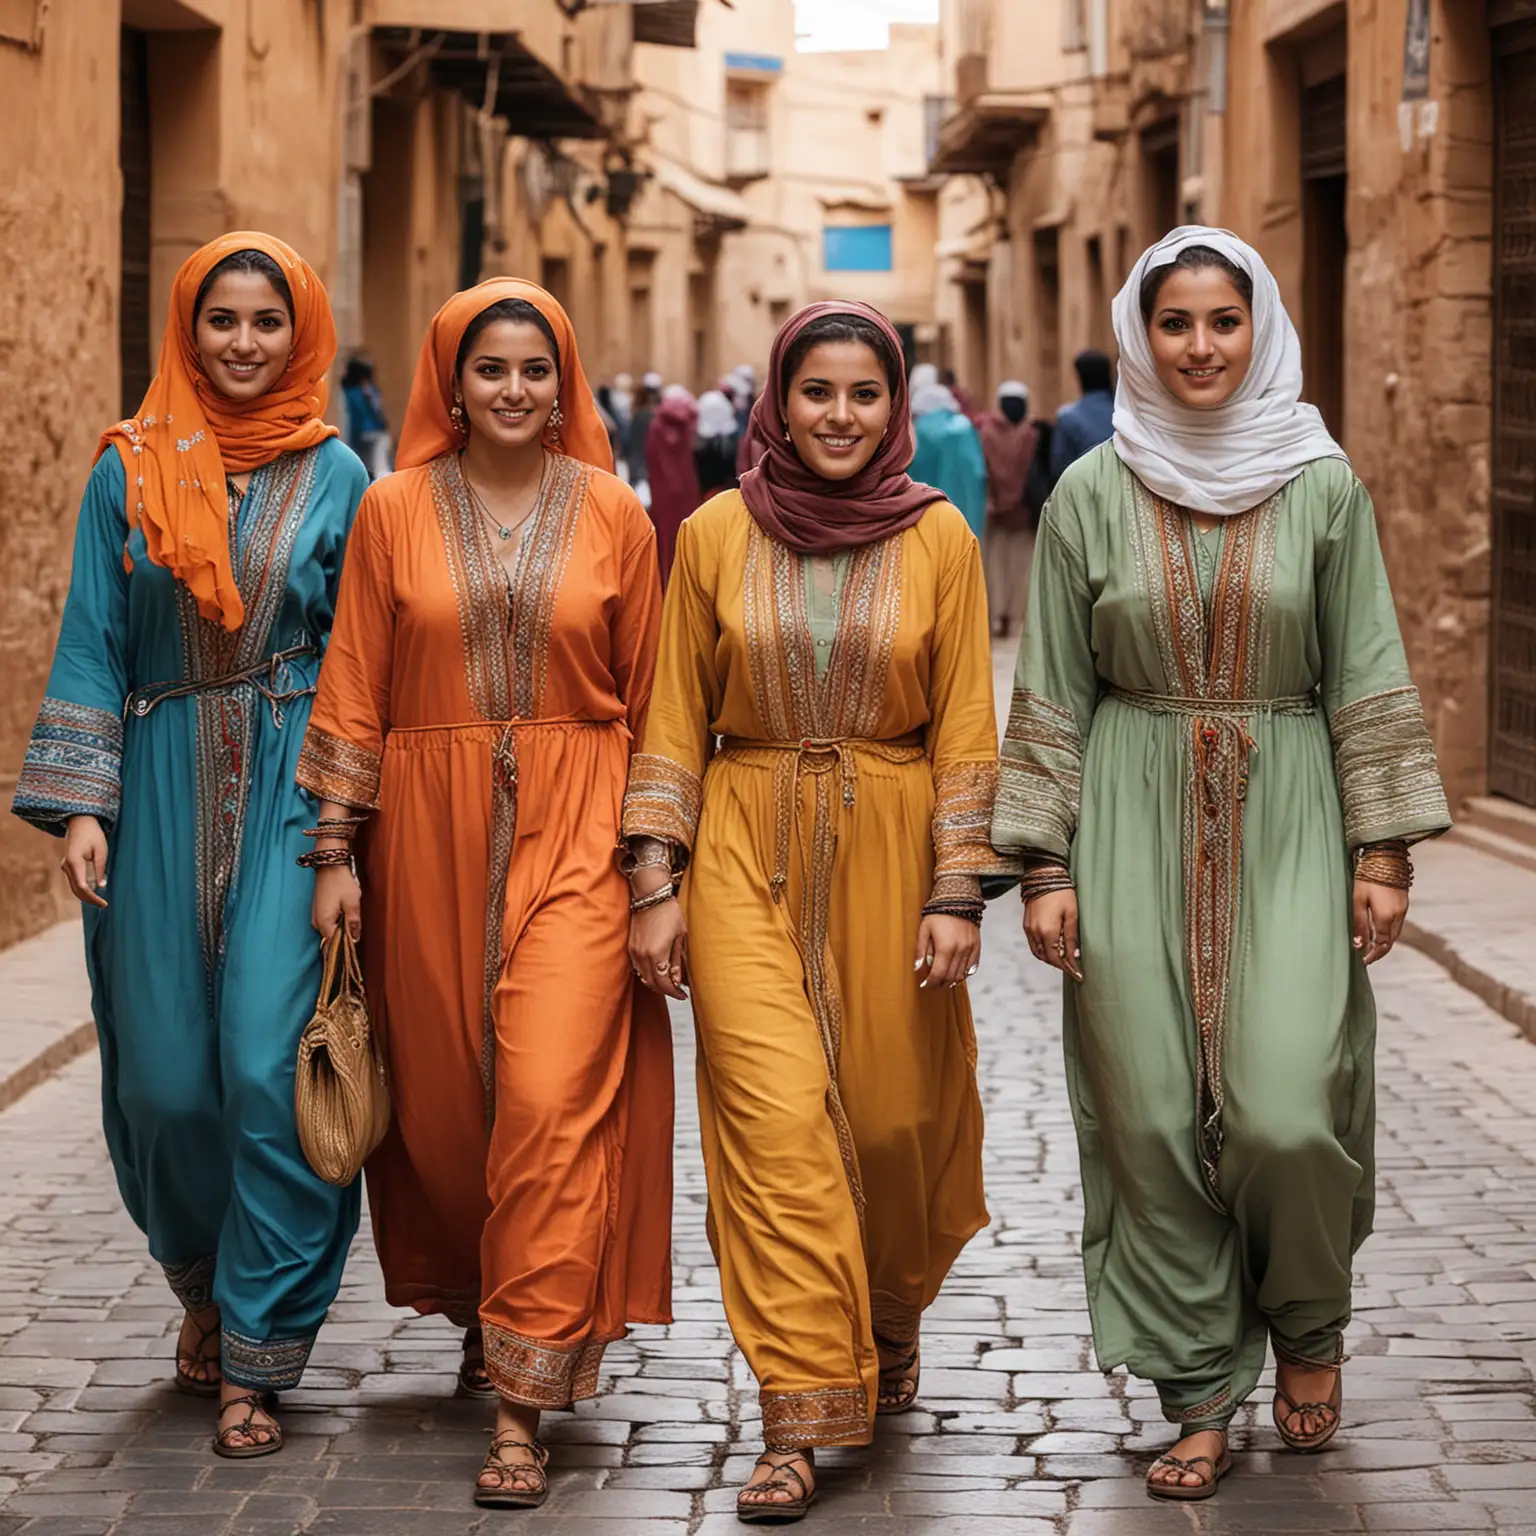 Moroccan women in traditional street clothes